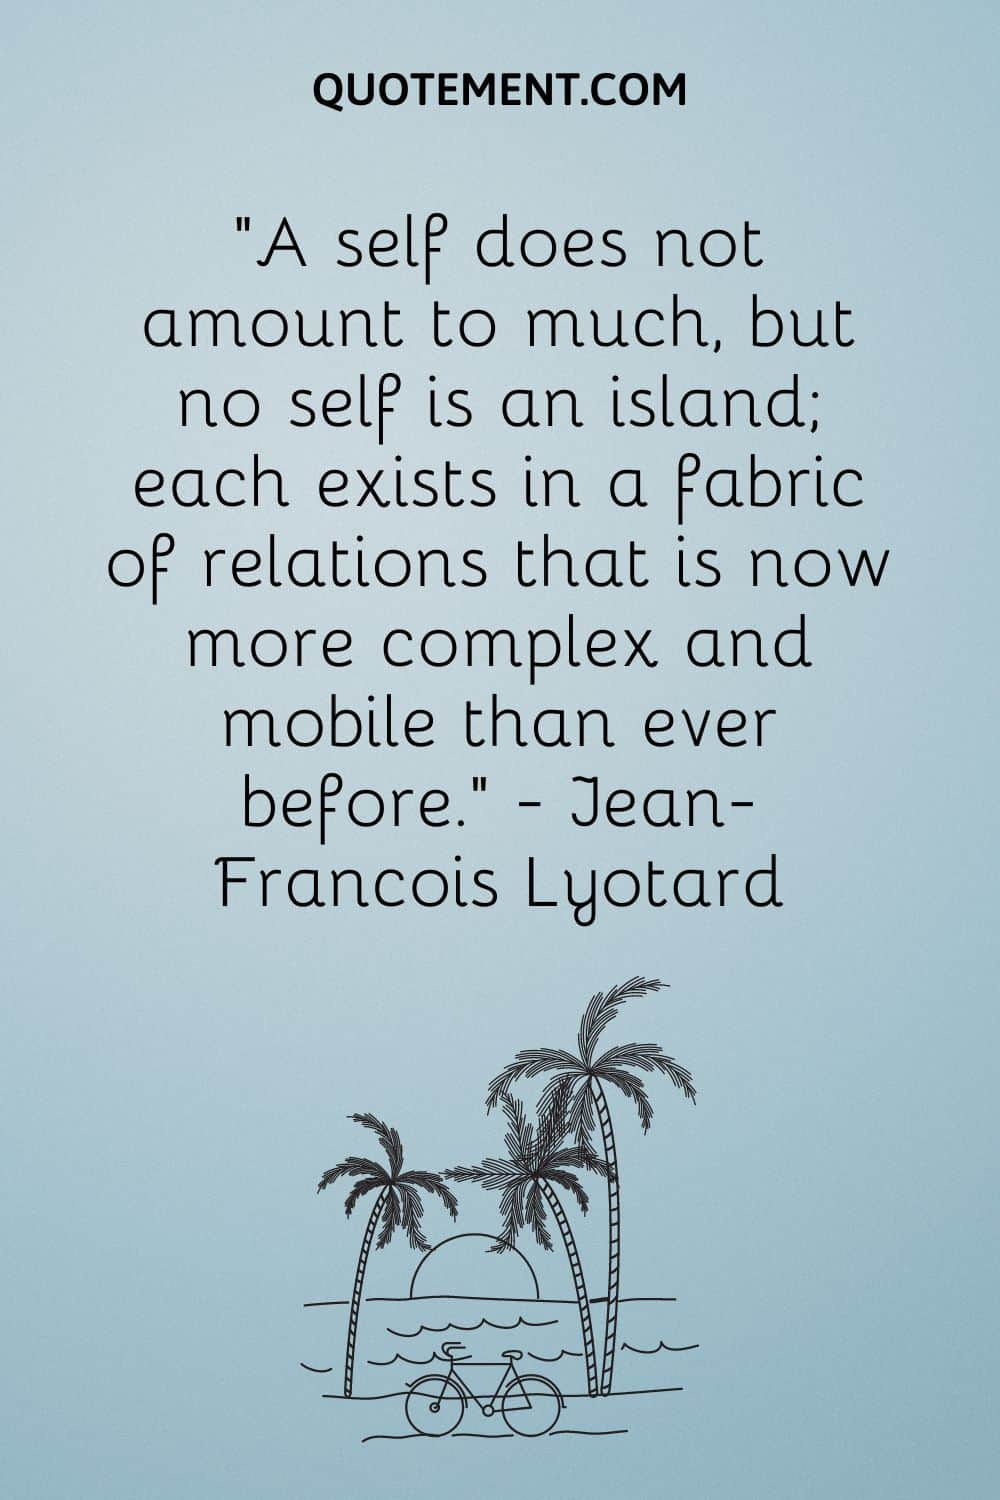 “A self does not amount to much, but no self is an island; each exists in a fabric of relations that is now more complex and mobile than ever before.” — Jean-Francois Lyotard